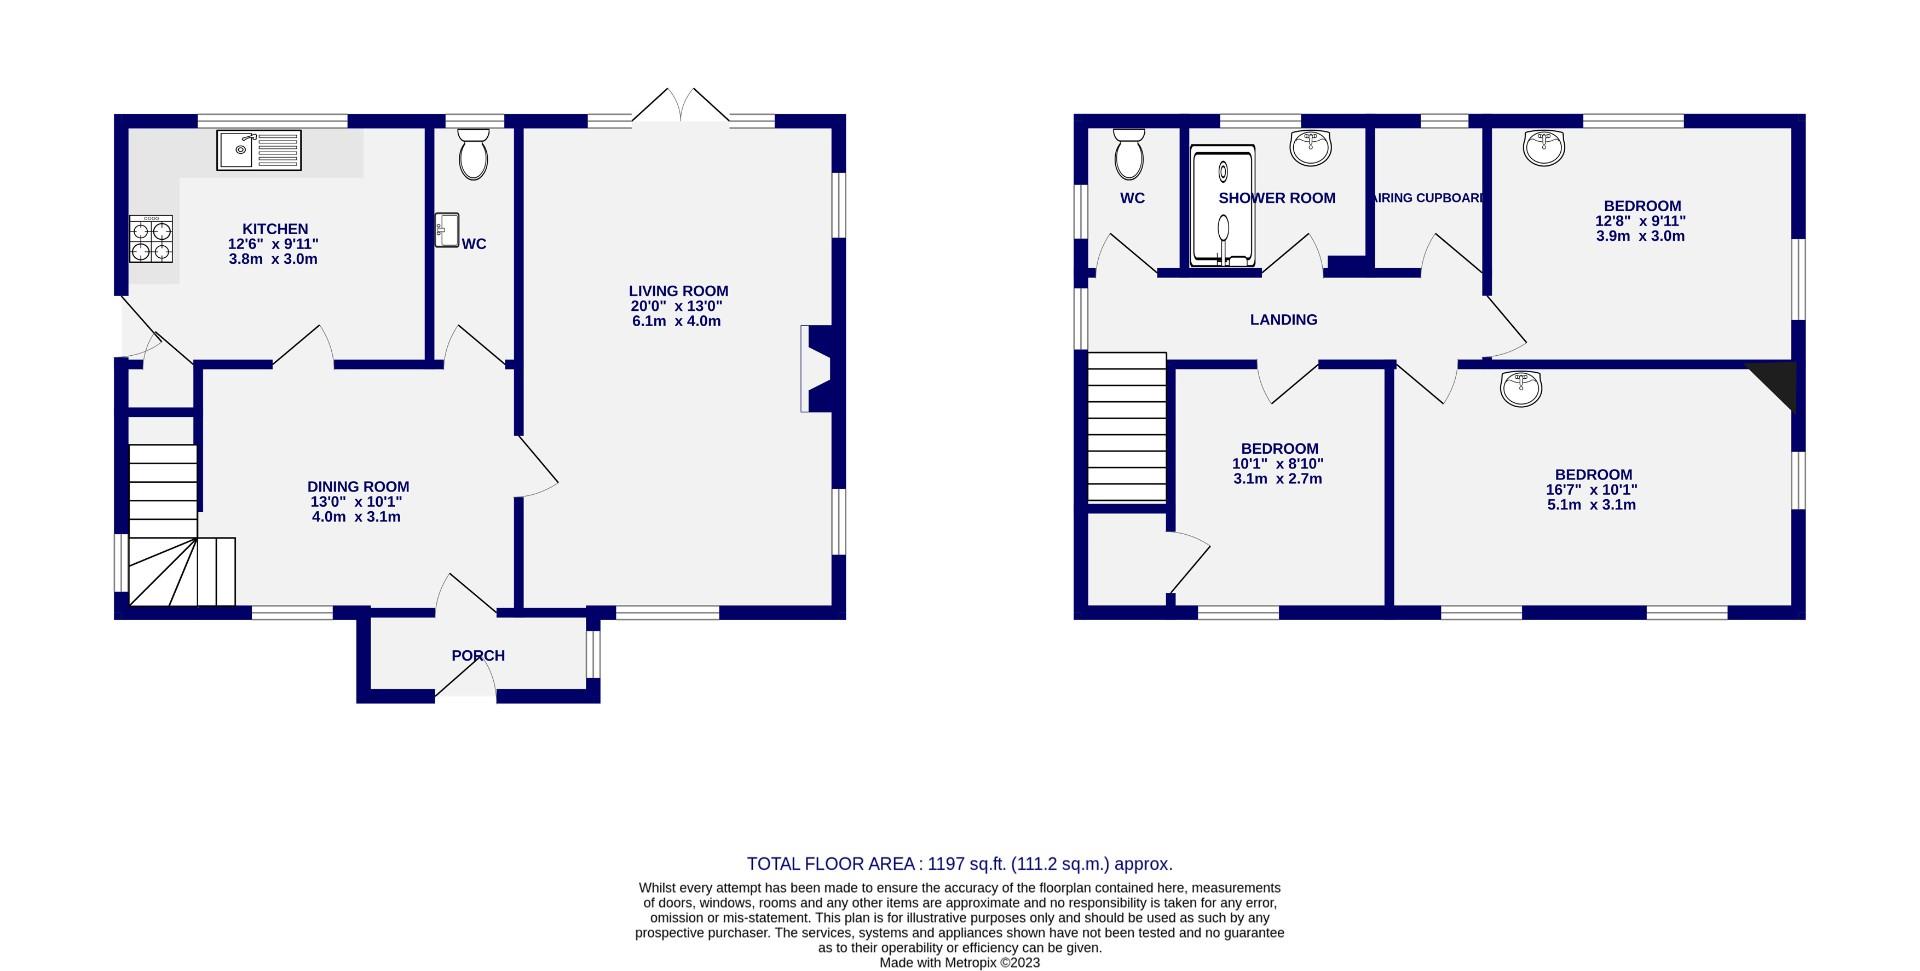 Floorplans For St. Aubyns Place, The Mount, York